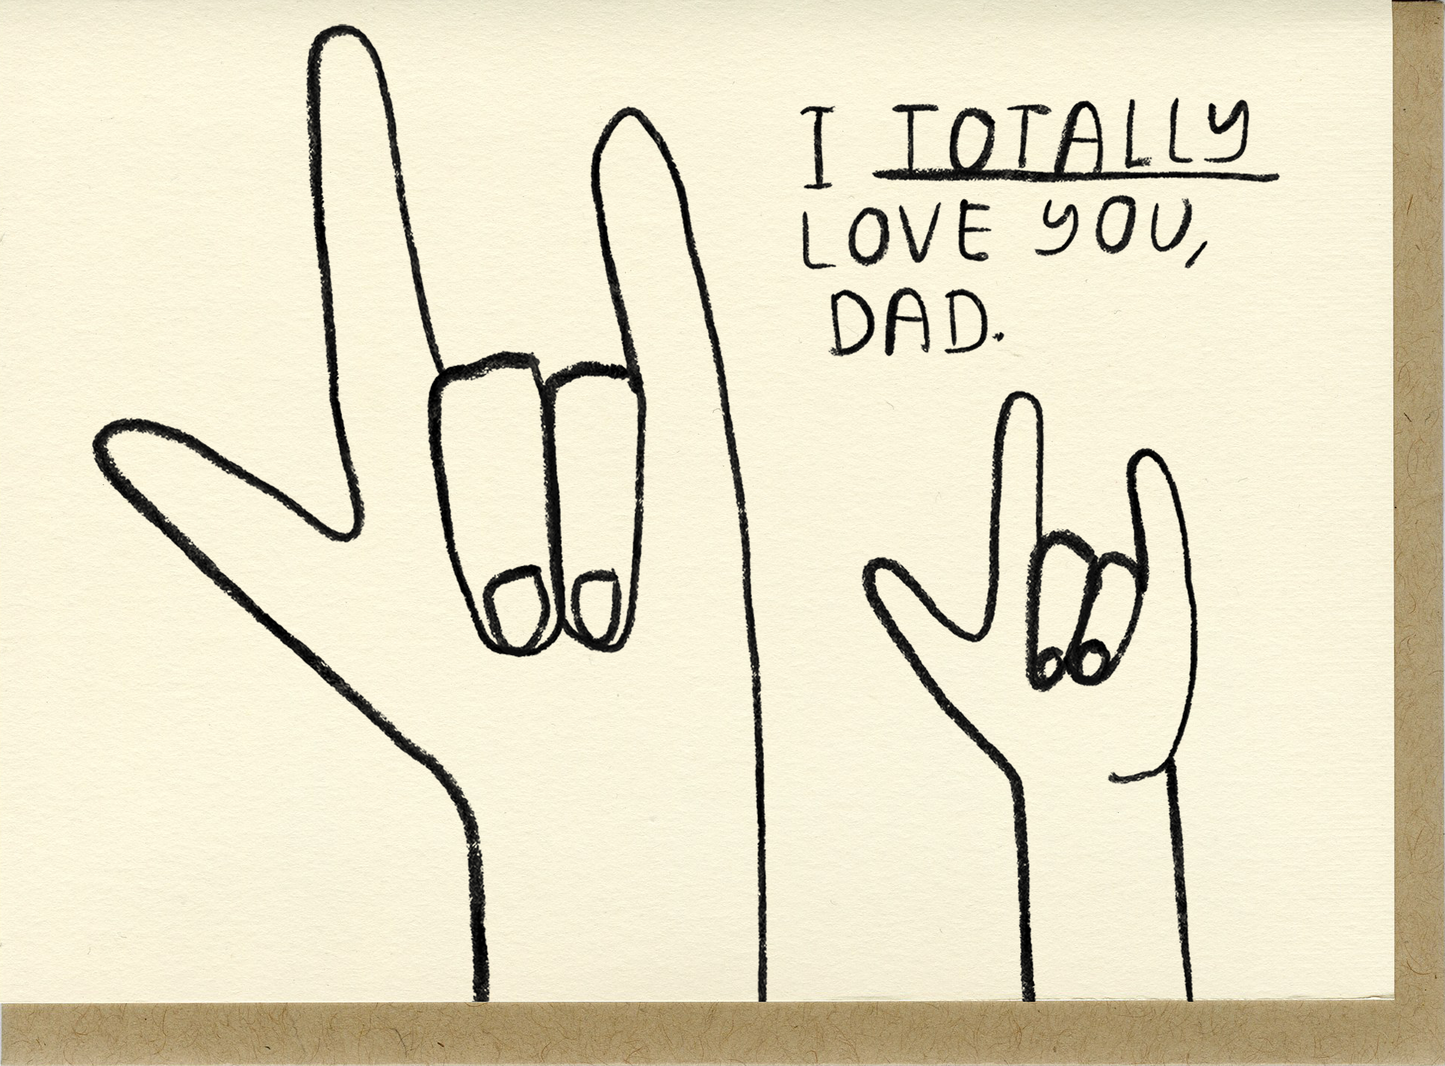 Totally Love You, Dad Greeting Card